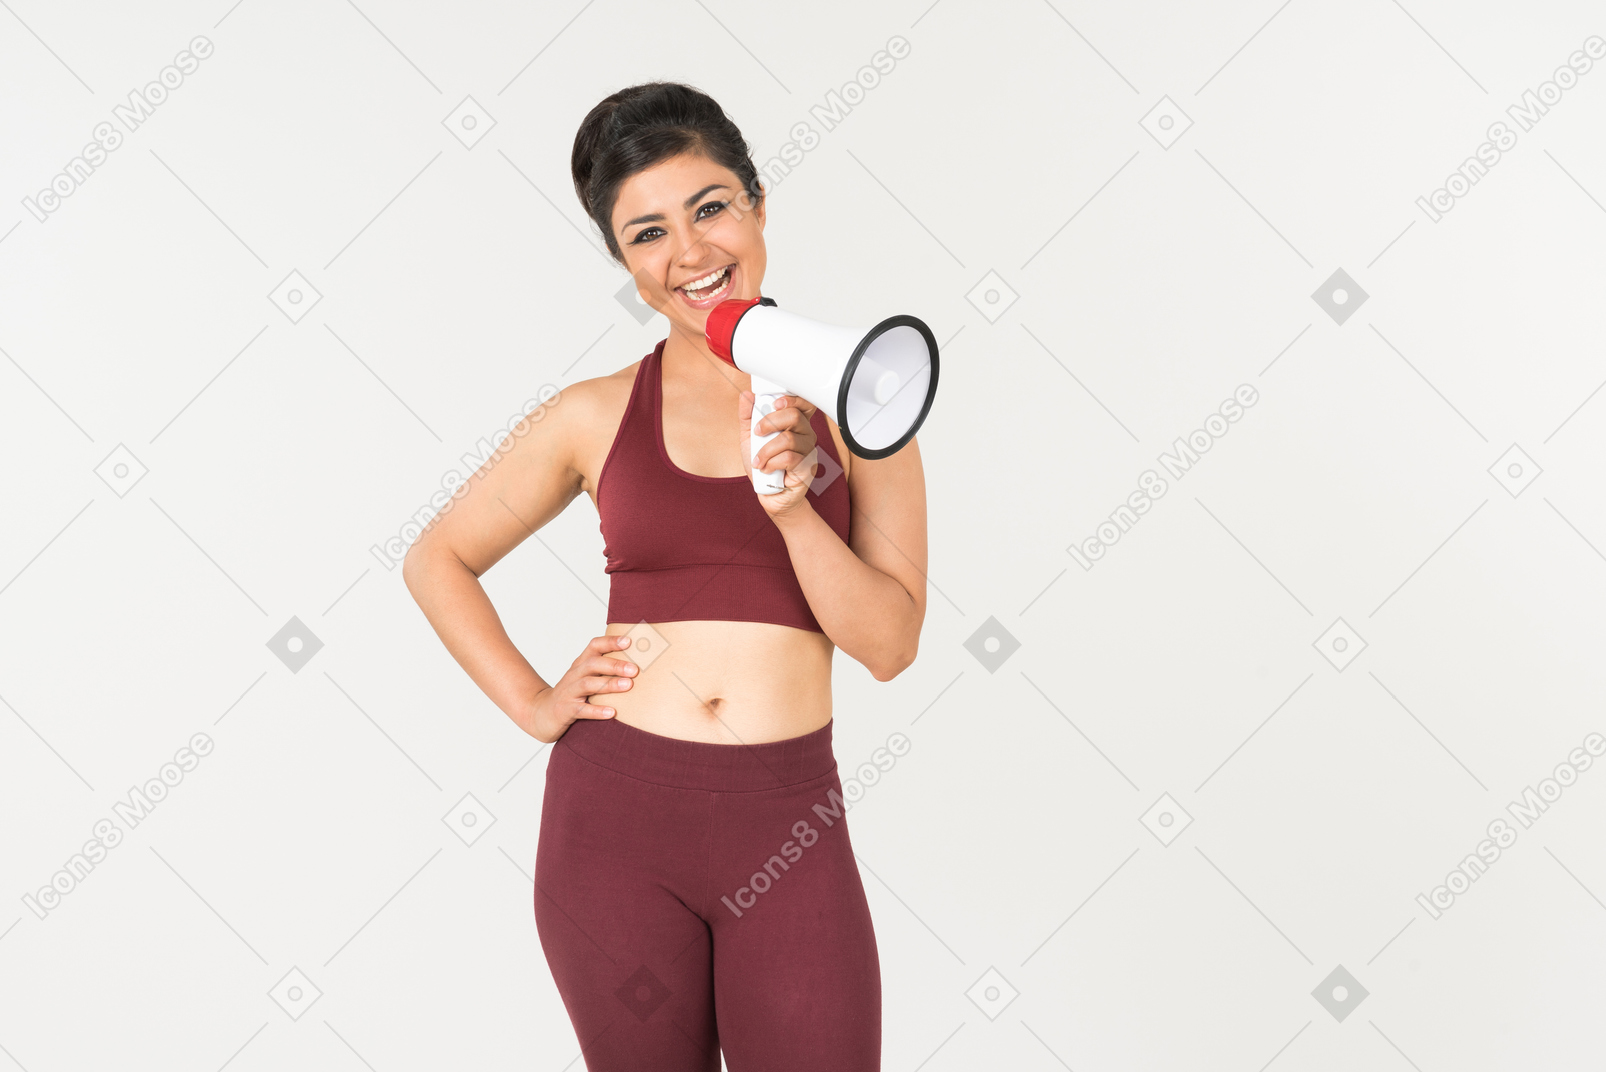 Laughing young indian woman  in sportswear holding megaphone